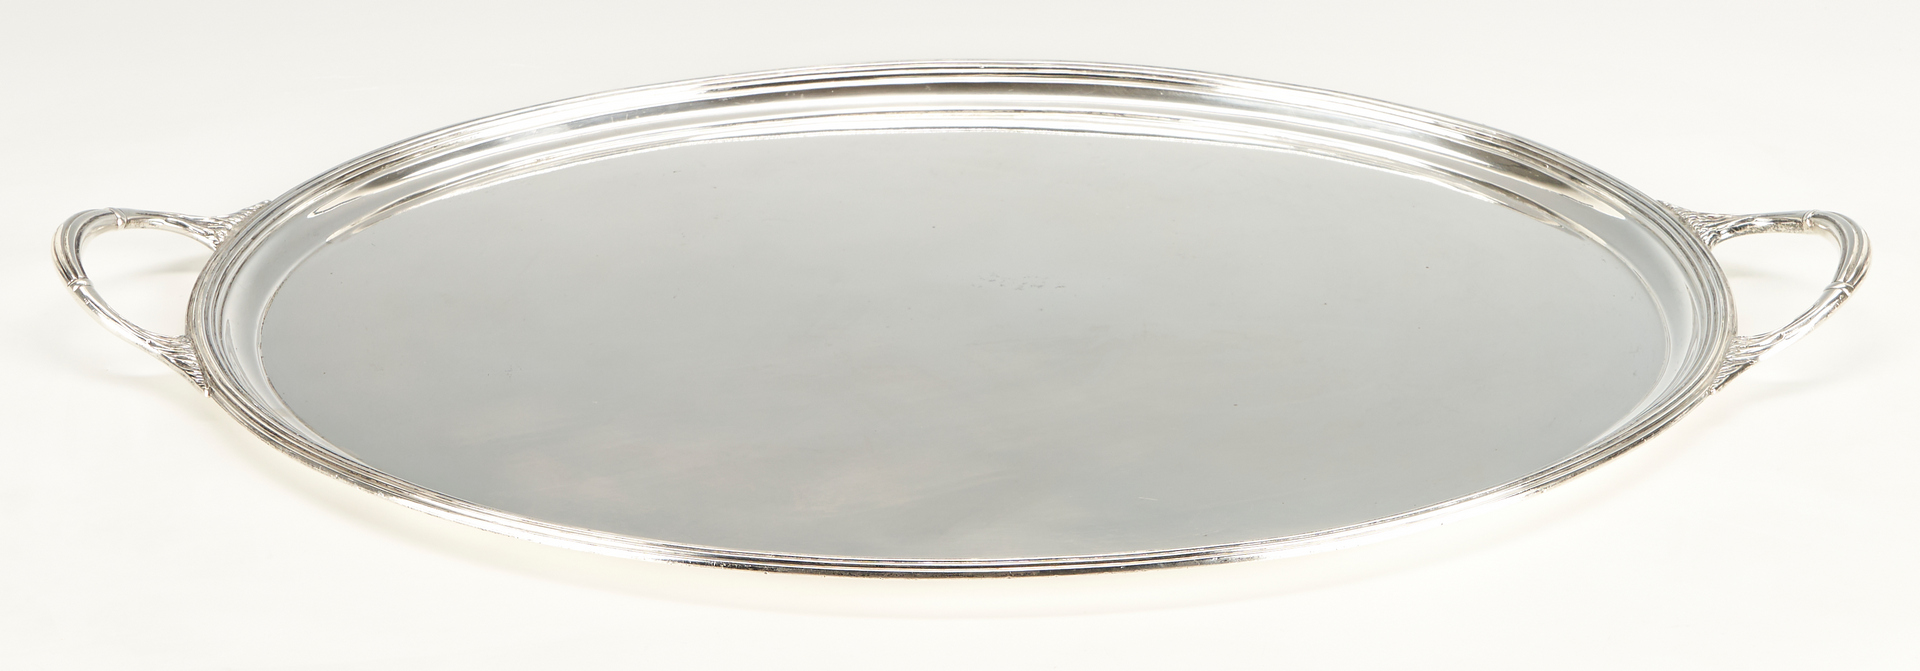 Lot 59: Large English 19th C. Sterling Silver Oval Platter